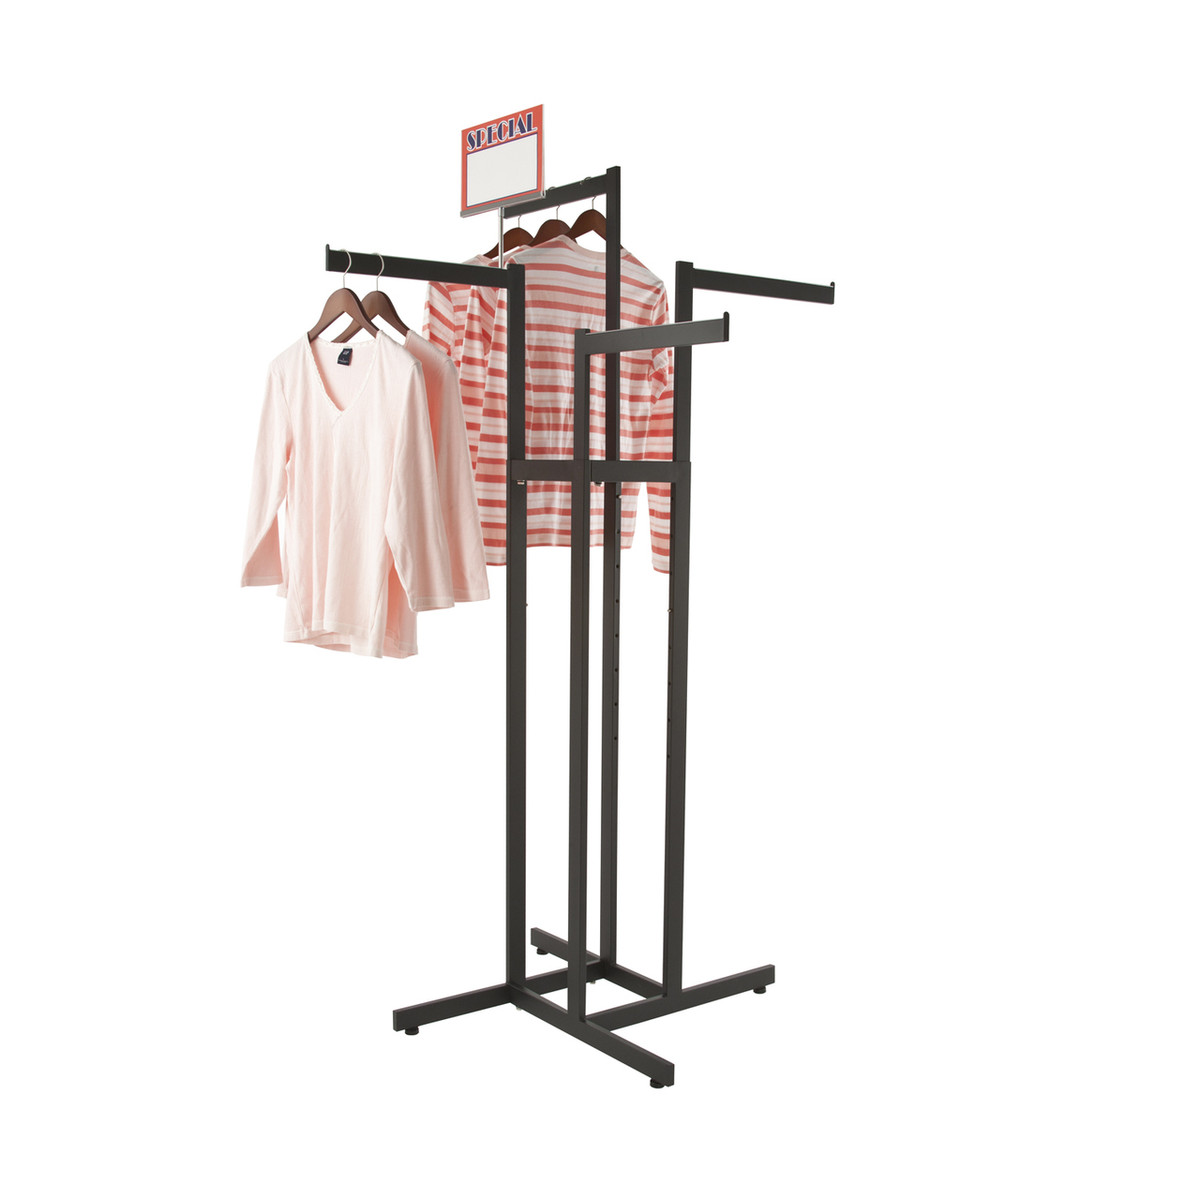 https://cdn11.bigcommerce.com/s-u7ds2t/images/stencil/1200x1200/products/629/3248/4_Way_All_Rectangular_Tube_Rack_4_Straight_16_Arms_Black__21099.1503072425.jpg?c=2?imbypass=on